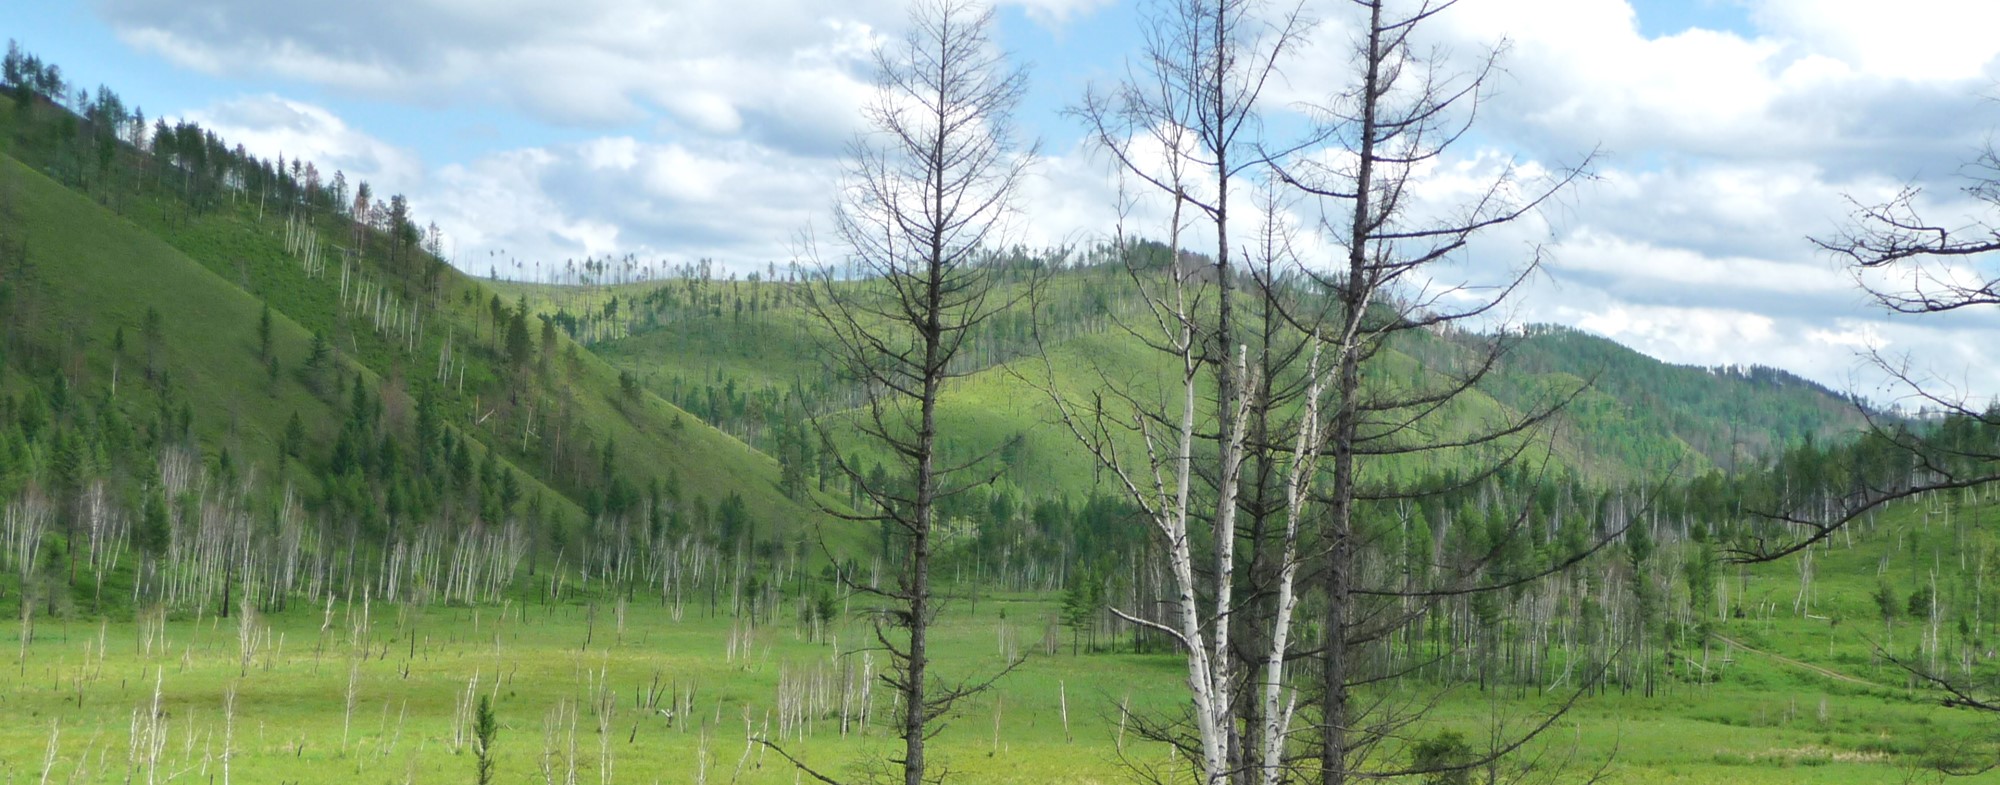 disturbed forest in Mongolia